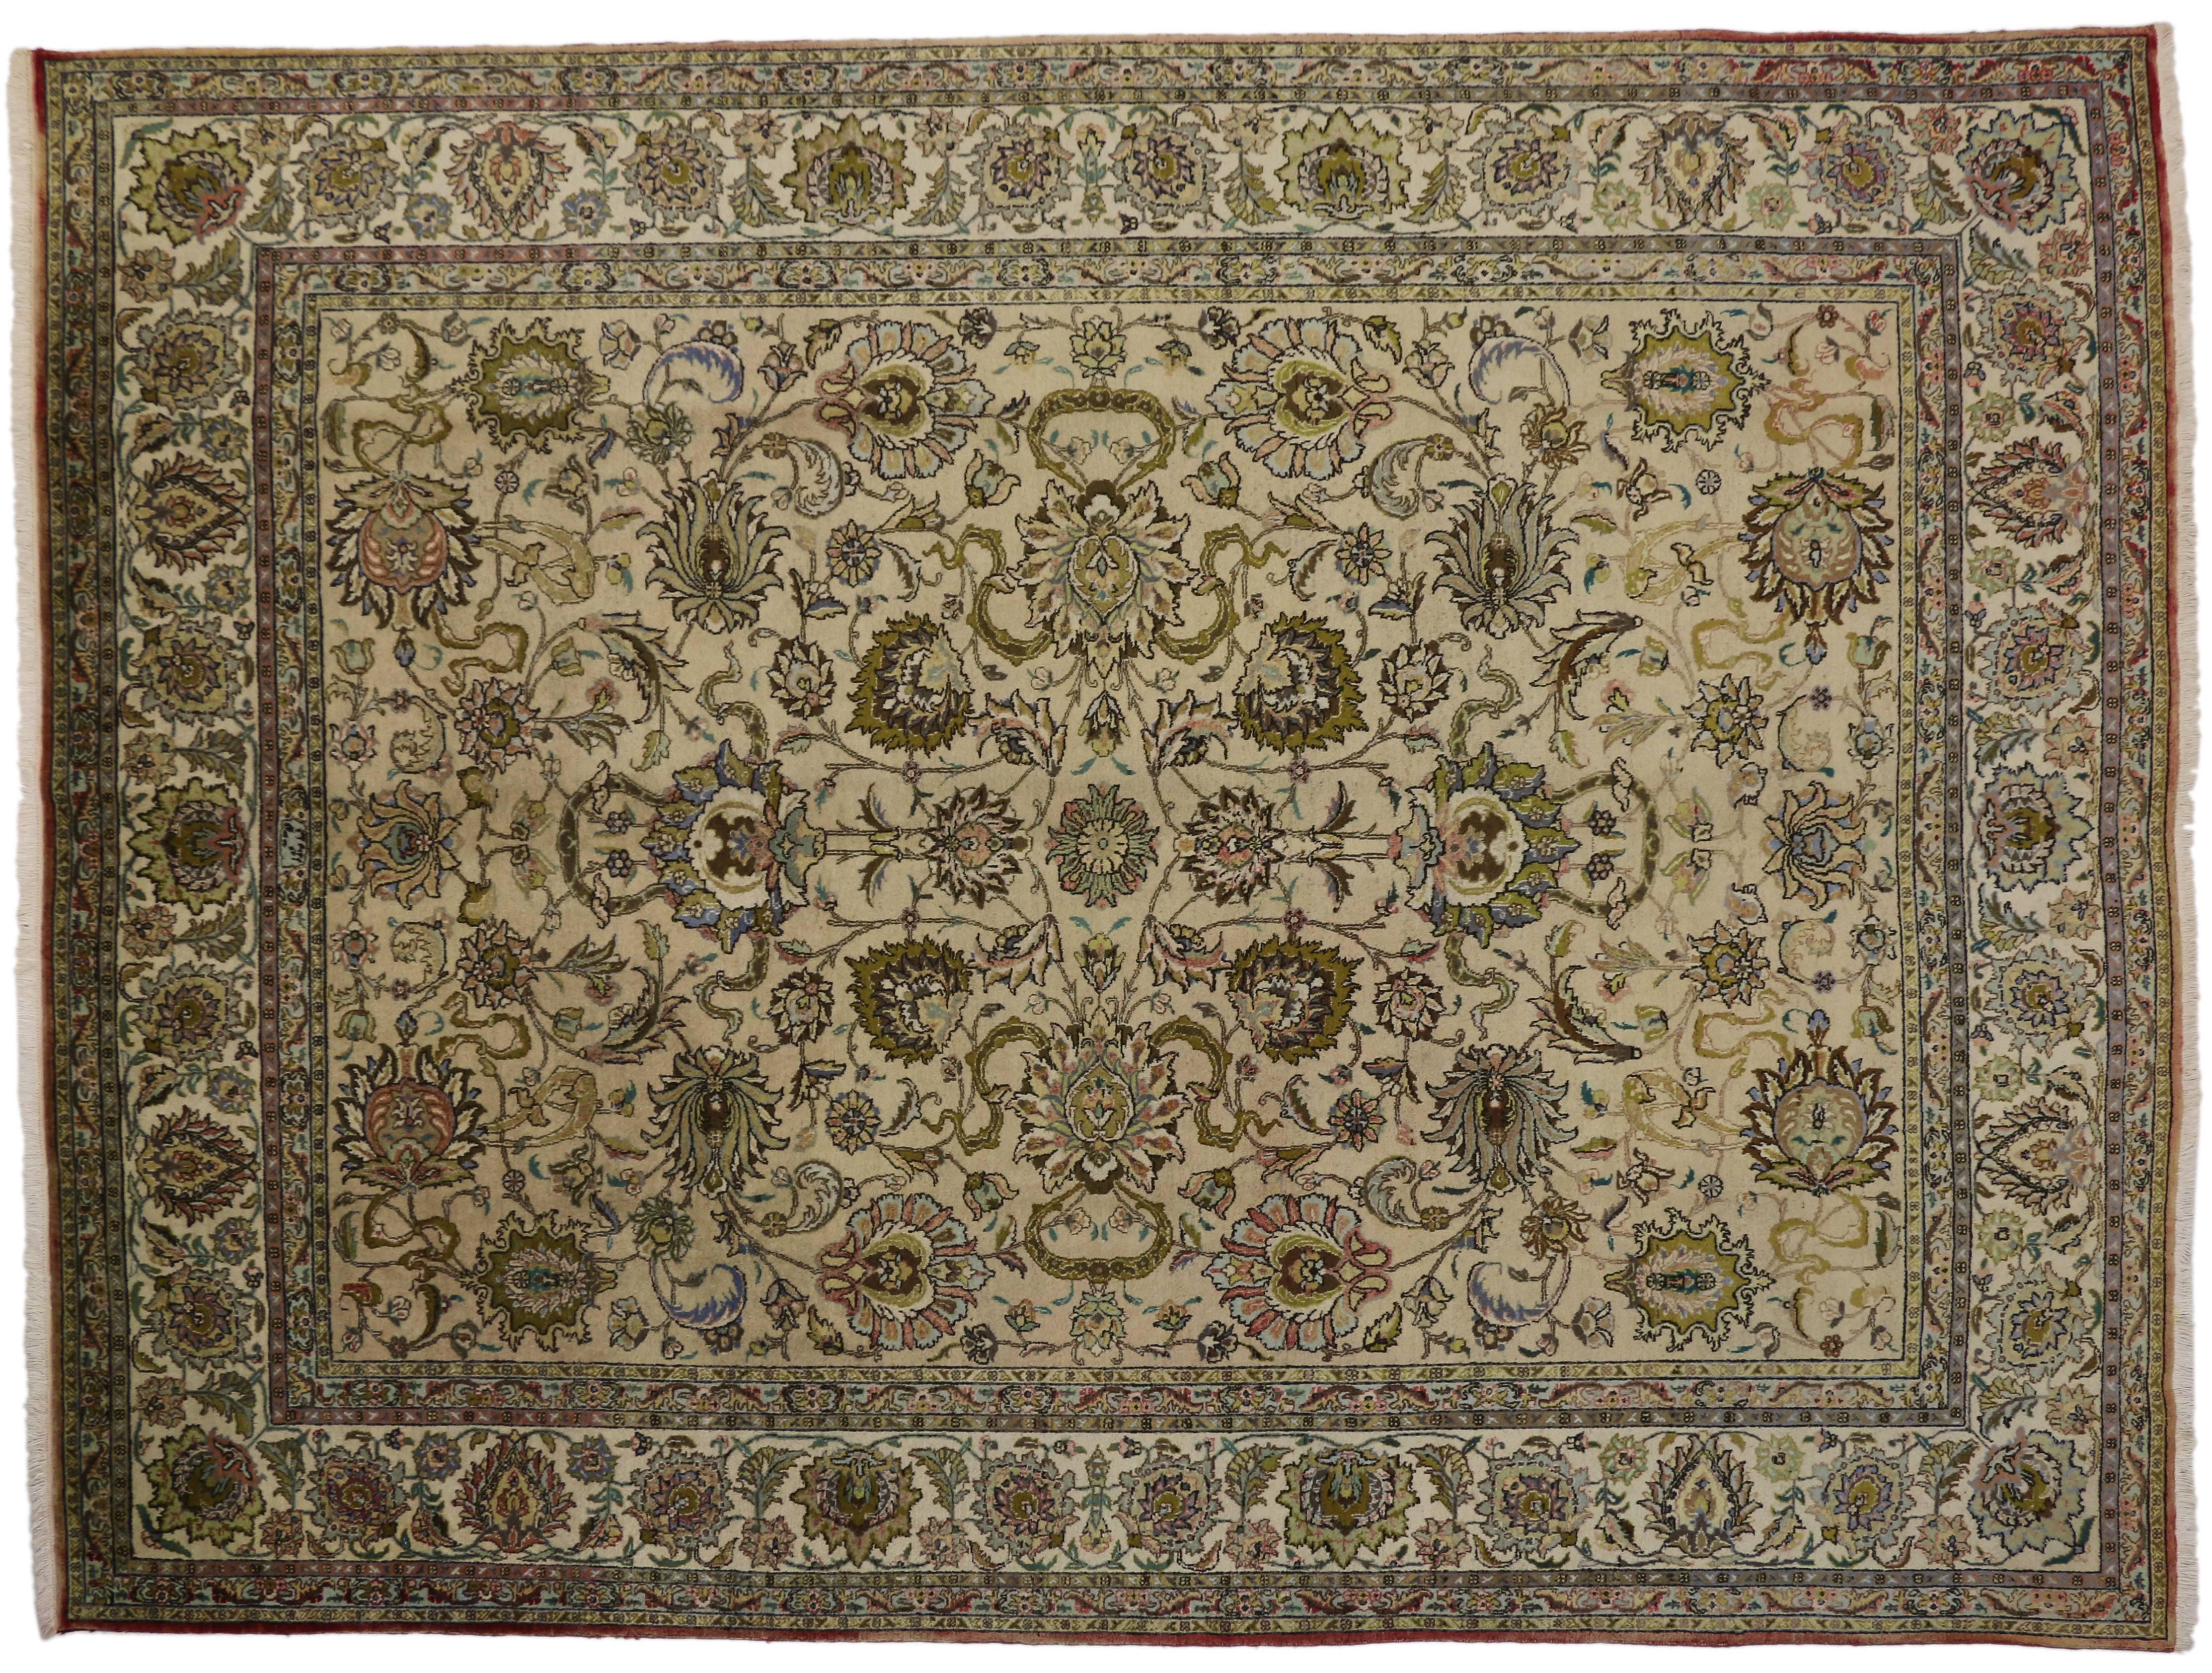 Vintage Persian Tabriz Area Rug with French Provincial Cottage Style In Good Condition For Sale In Dallas, TX